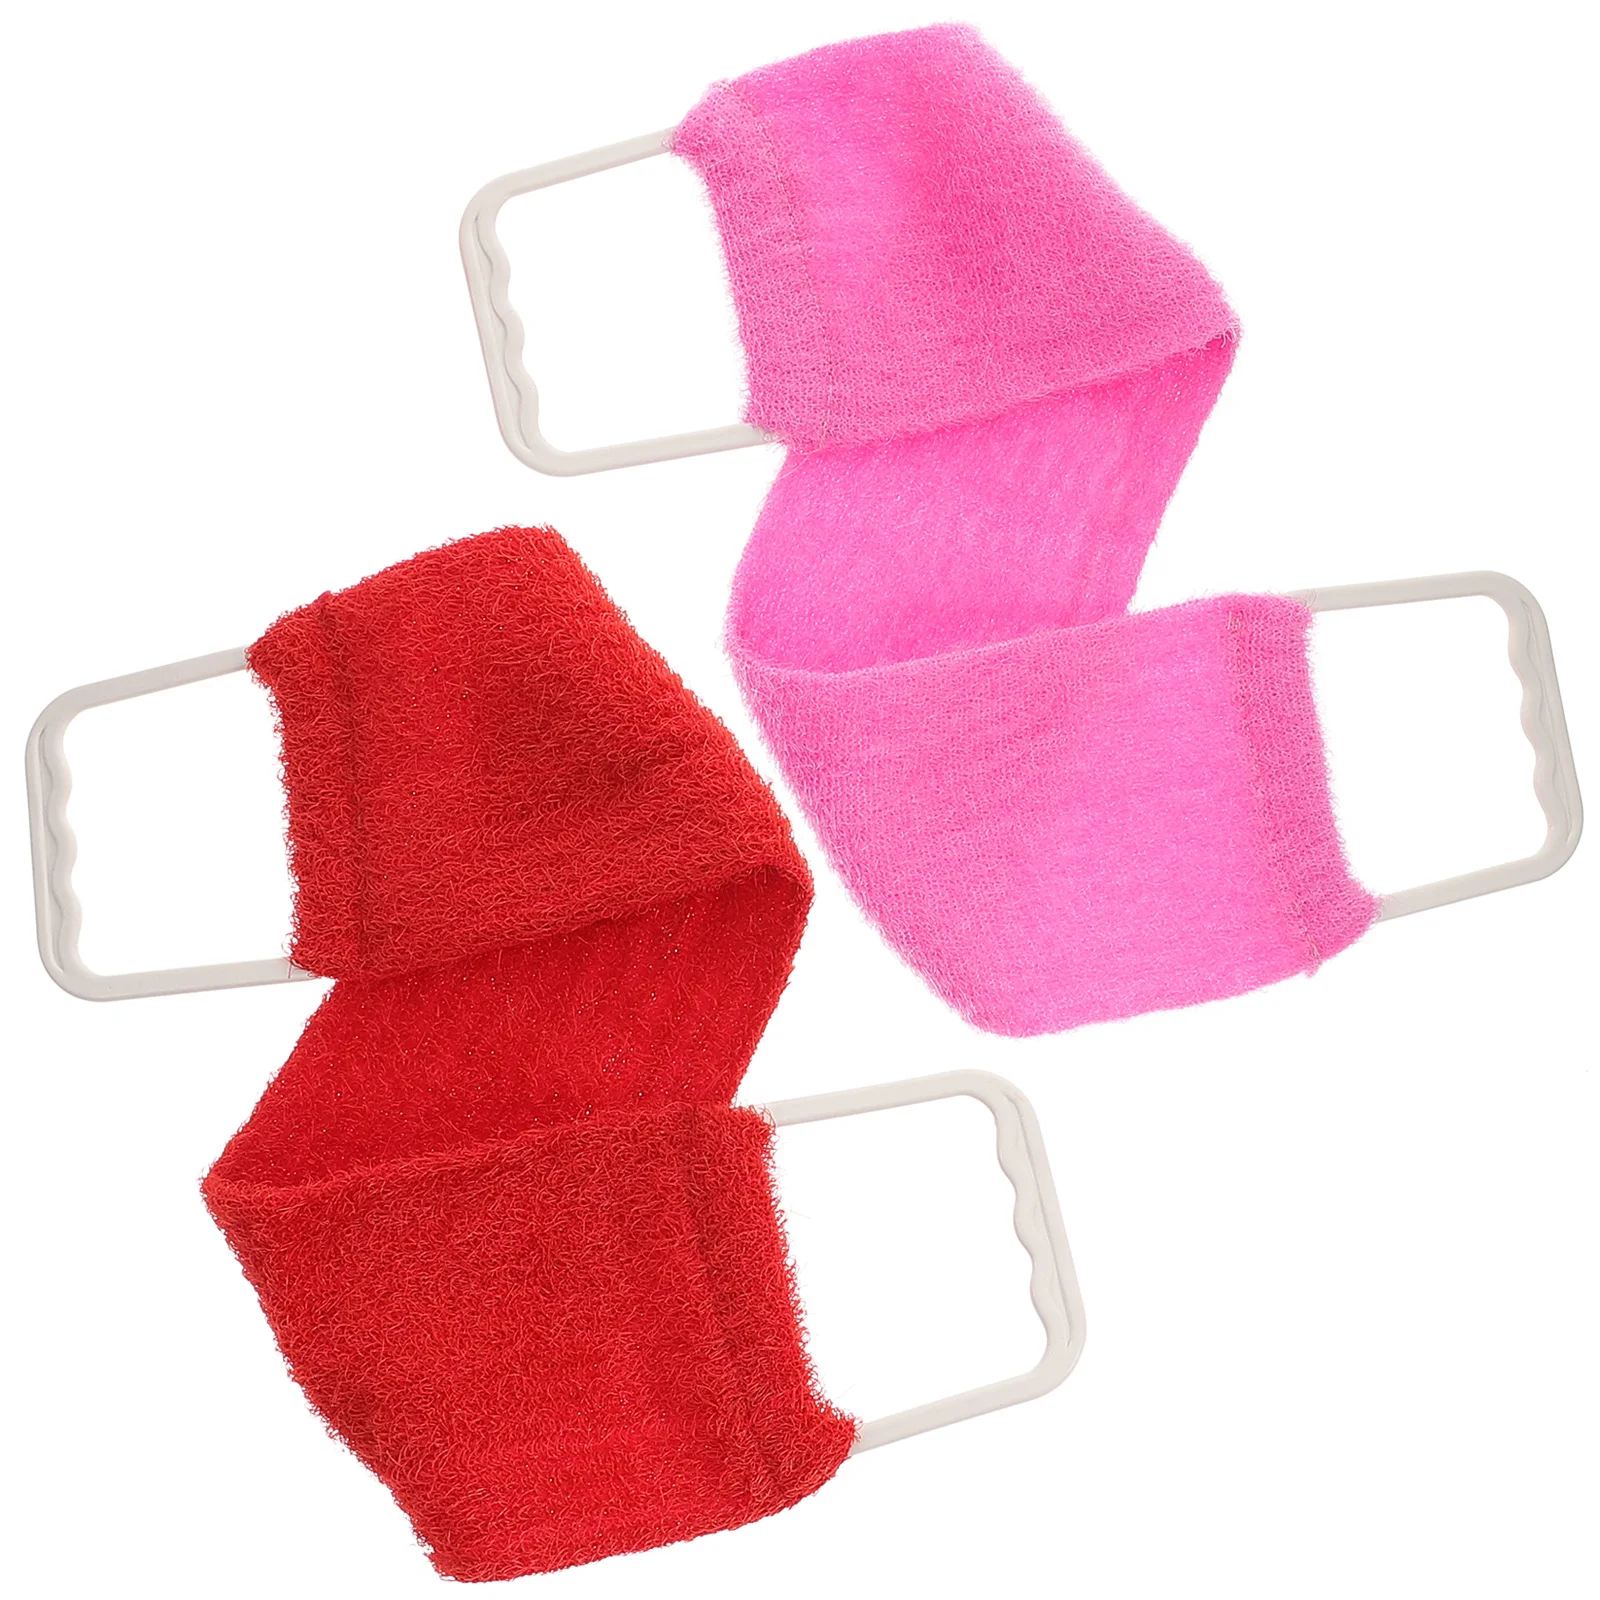 Back Scrubber Towel Exfoliating Shower Cloth Double- sided for Bath Shower Scrub Strap ( )